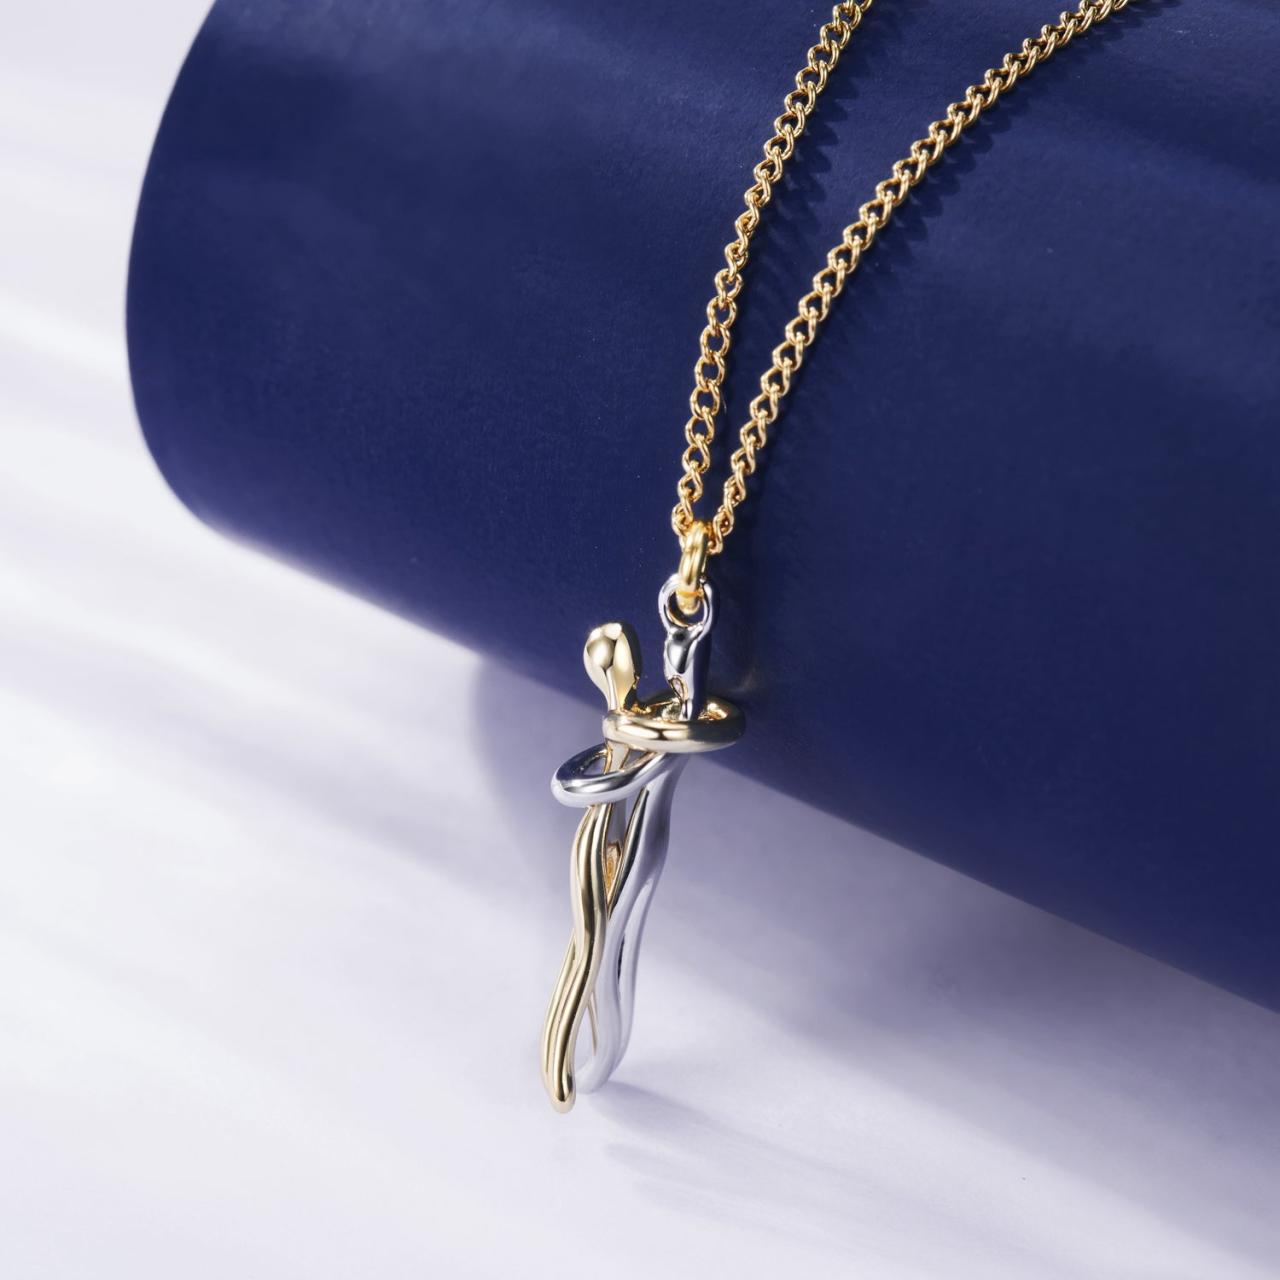 The Perfect Gift for Loved One-Hug NecklaceBest Gift for your lover - Buy One Get One Free Now